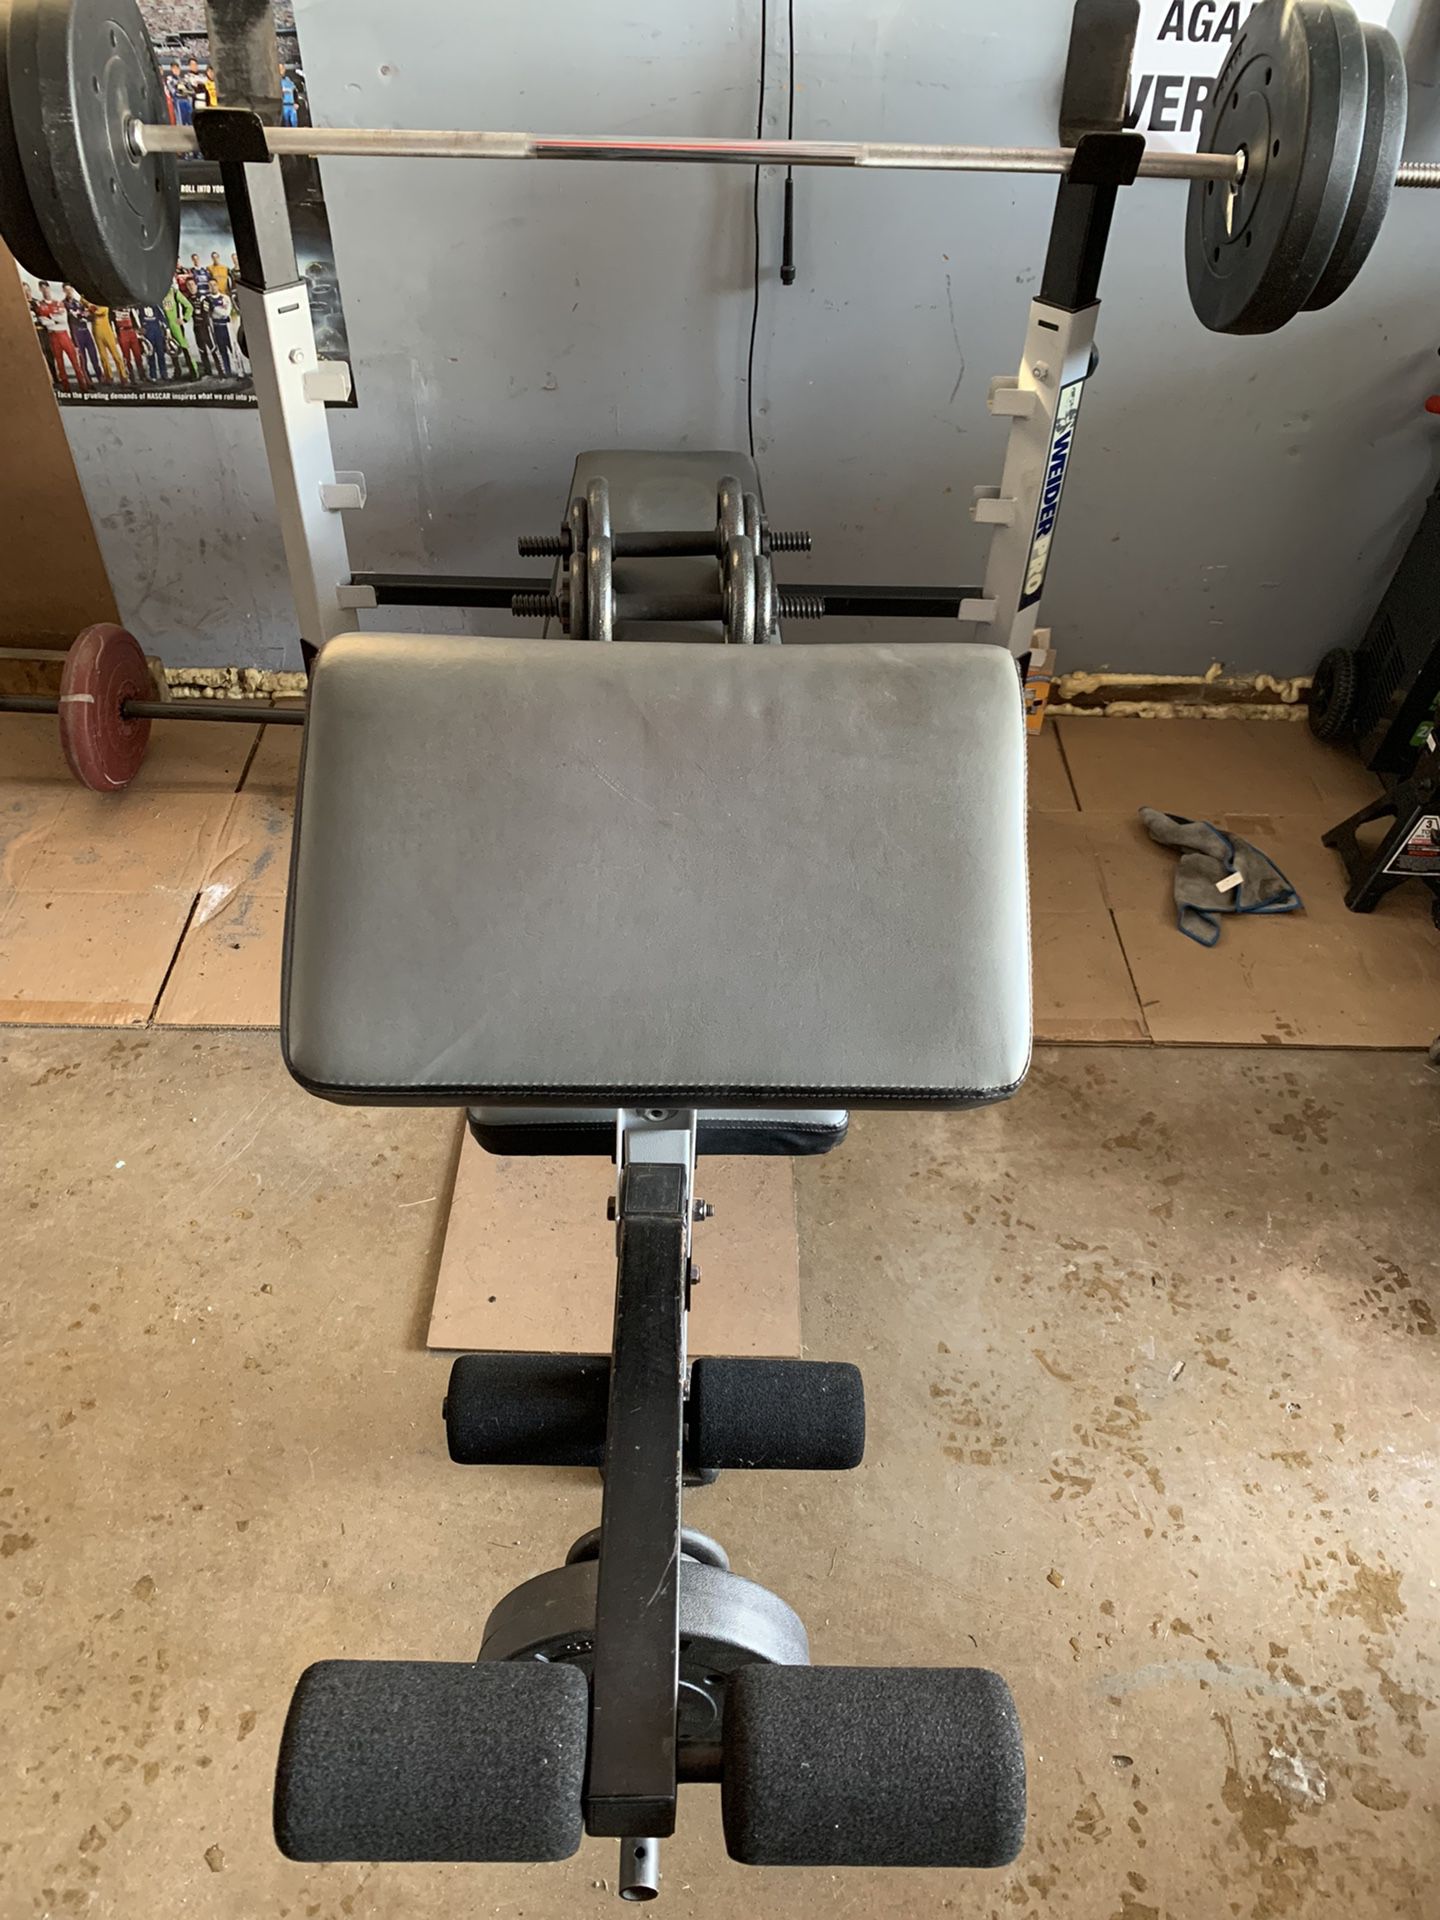 Weight Bench With Weights Gym Equipment 